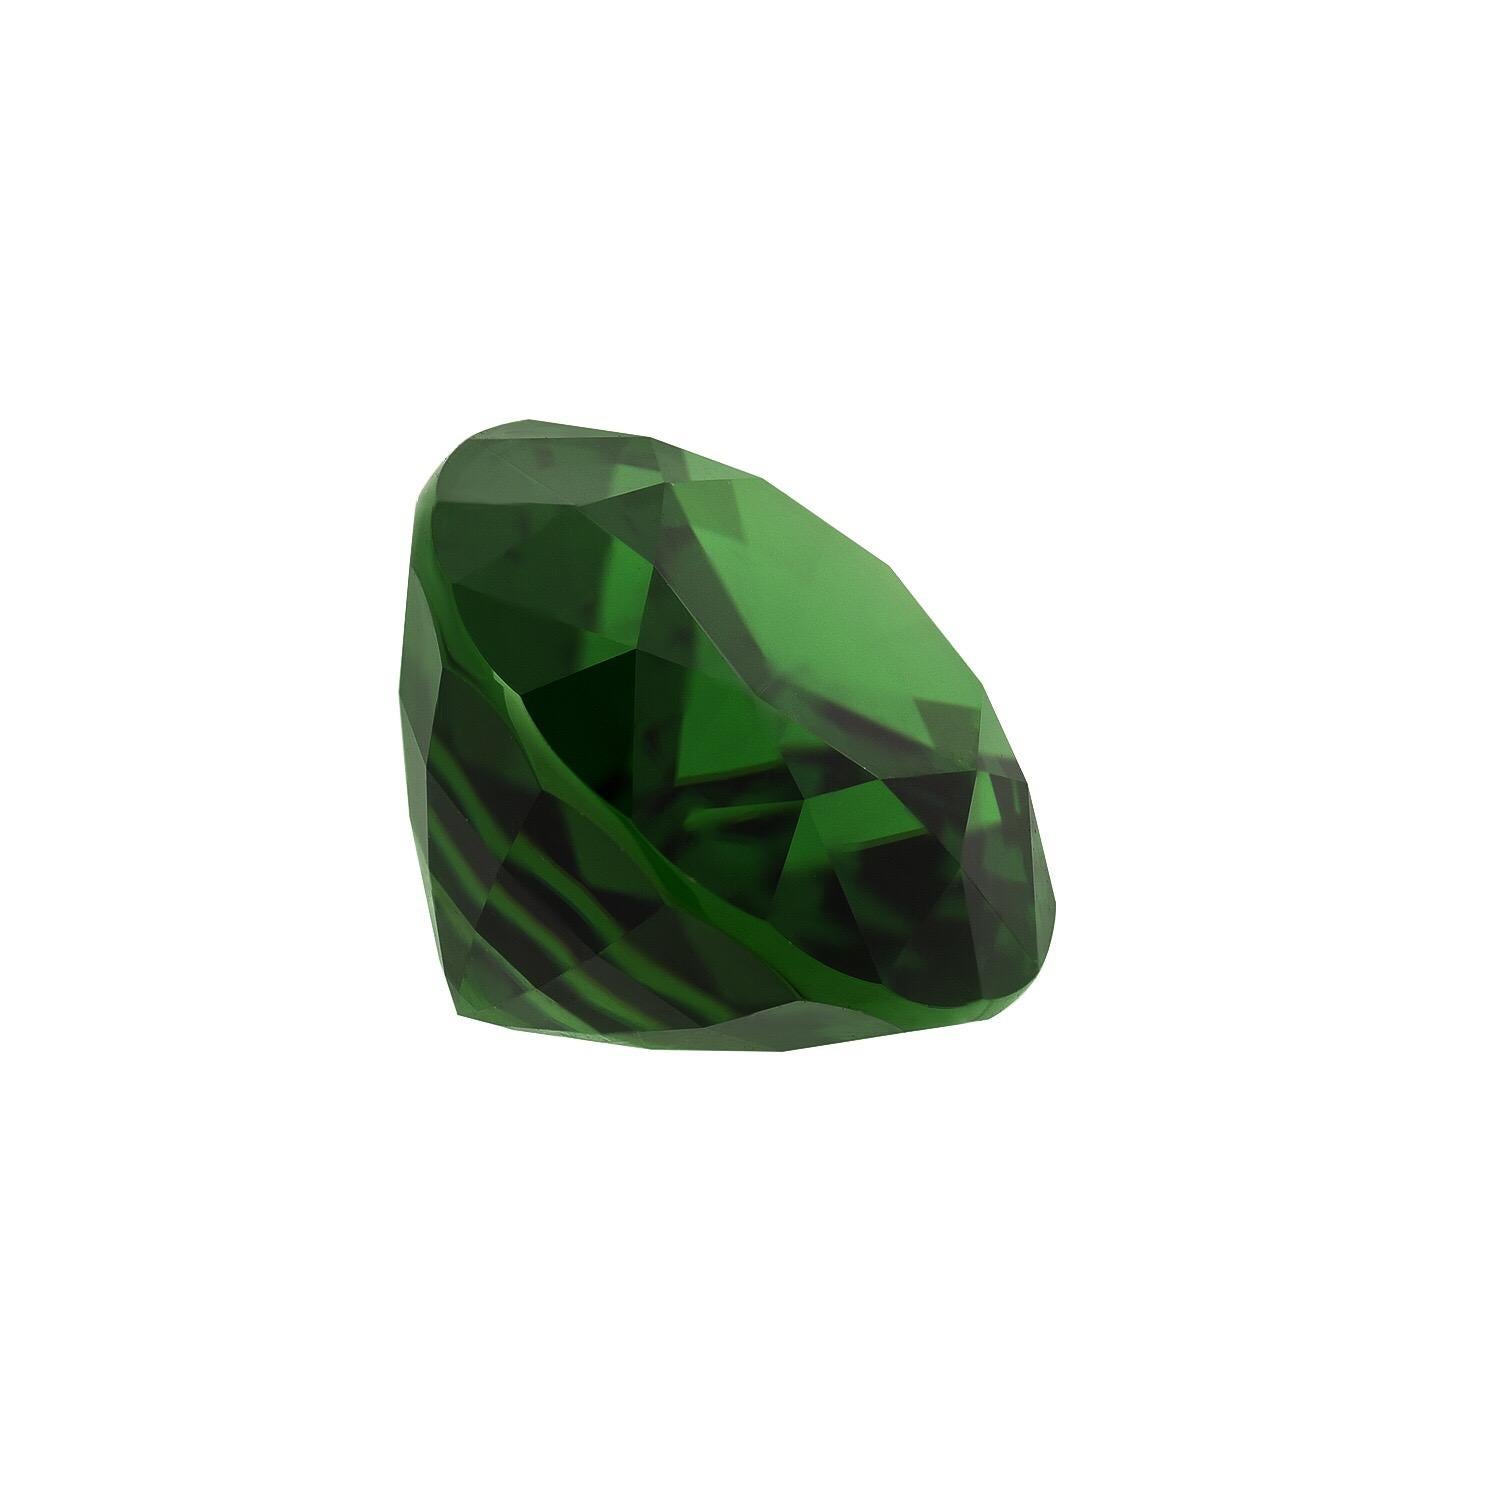 Natural, untreated, collection quality 7.70 carat, vivid green Chrome Tourmaline oval gem, offered loose to a fine gemstone collector.
The G.I.A. report is attached to the image selection for your reference.
Returns are accepted and paid by us